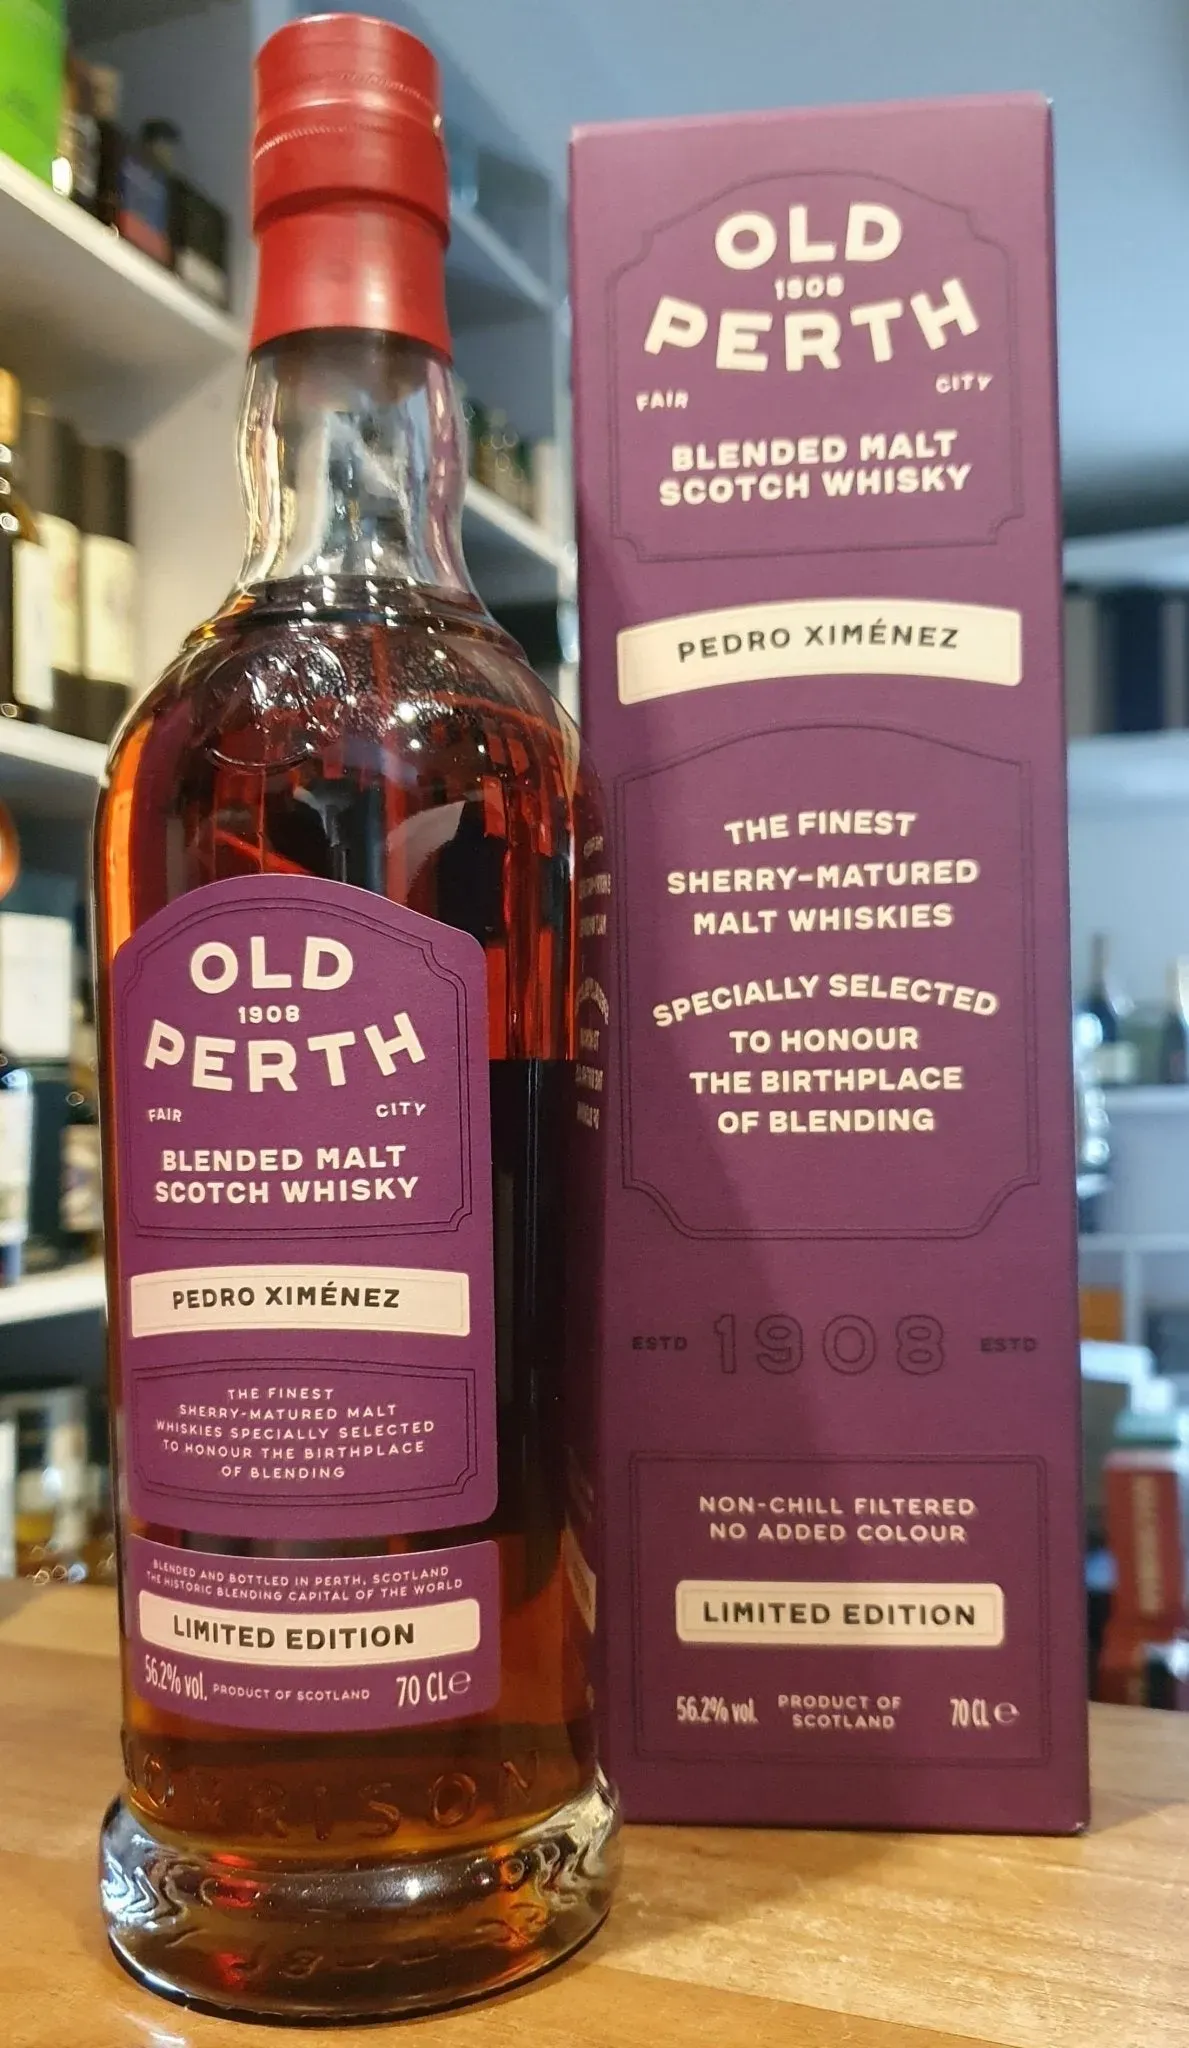 Old Perth Pedro Ximenez 2023 PX cask limited Edition 0,7l 56,2% vol. Whisky